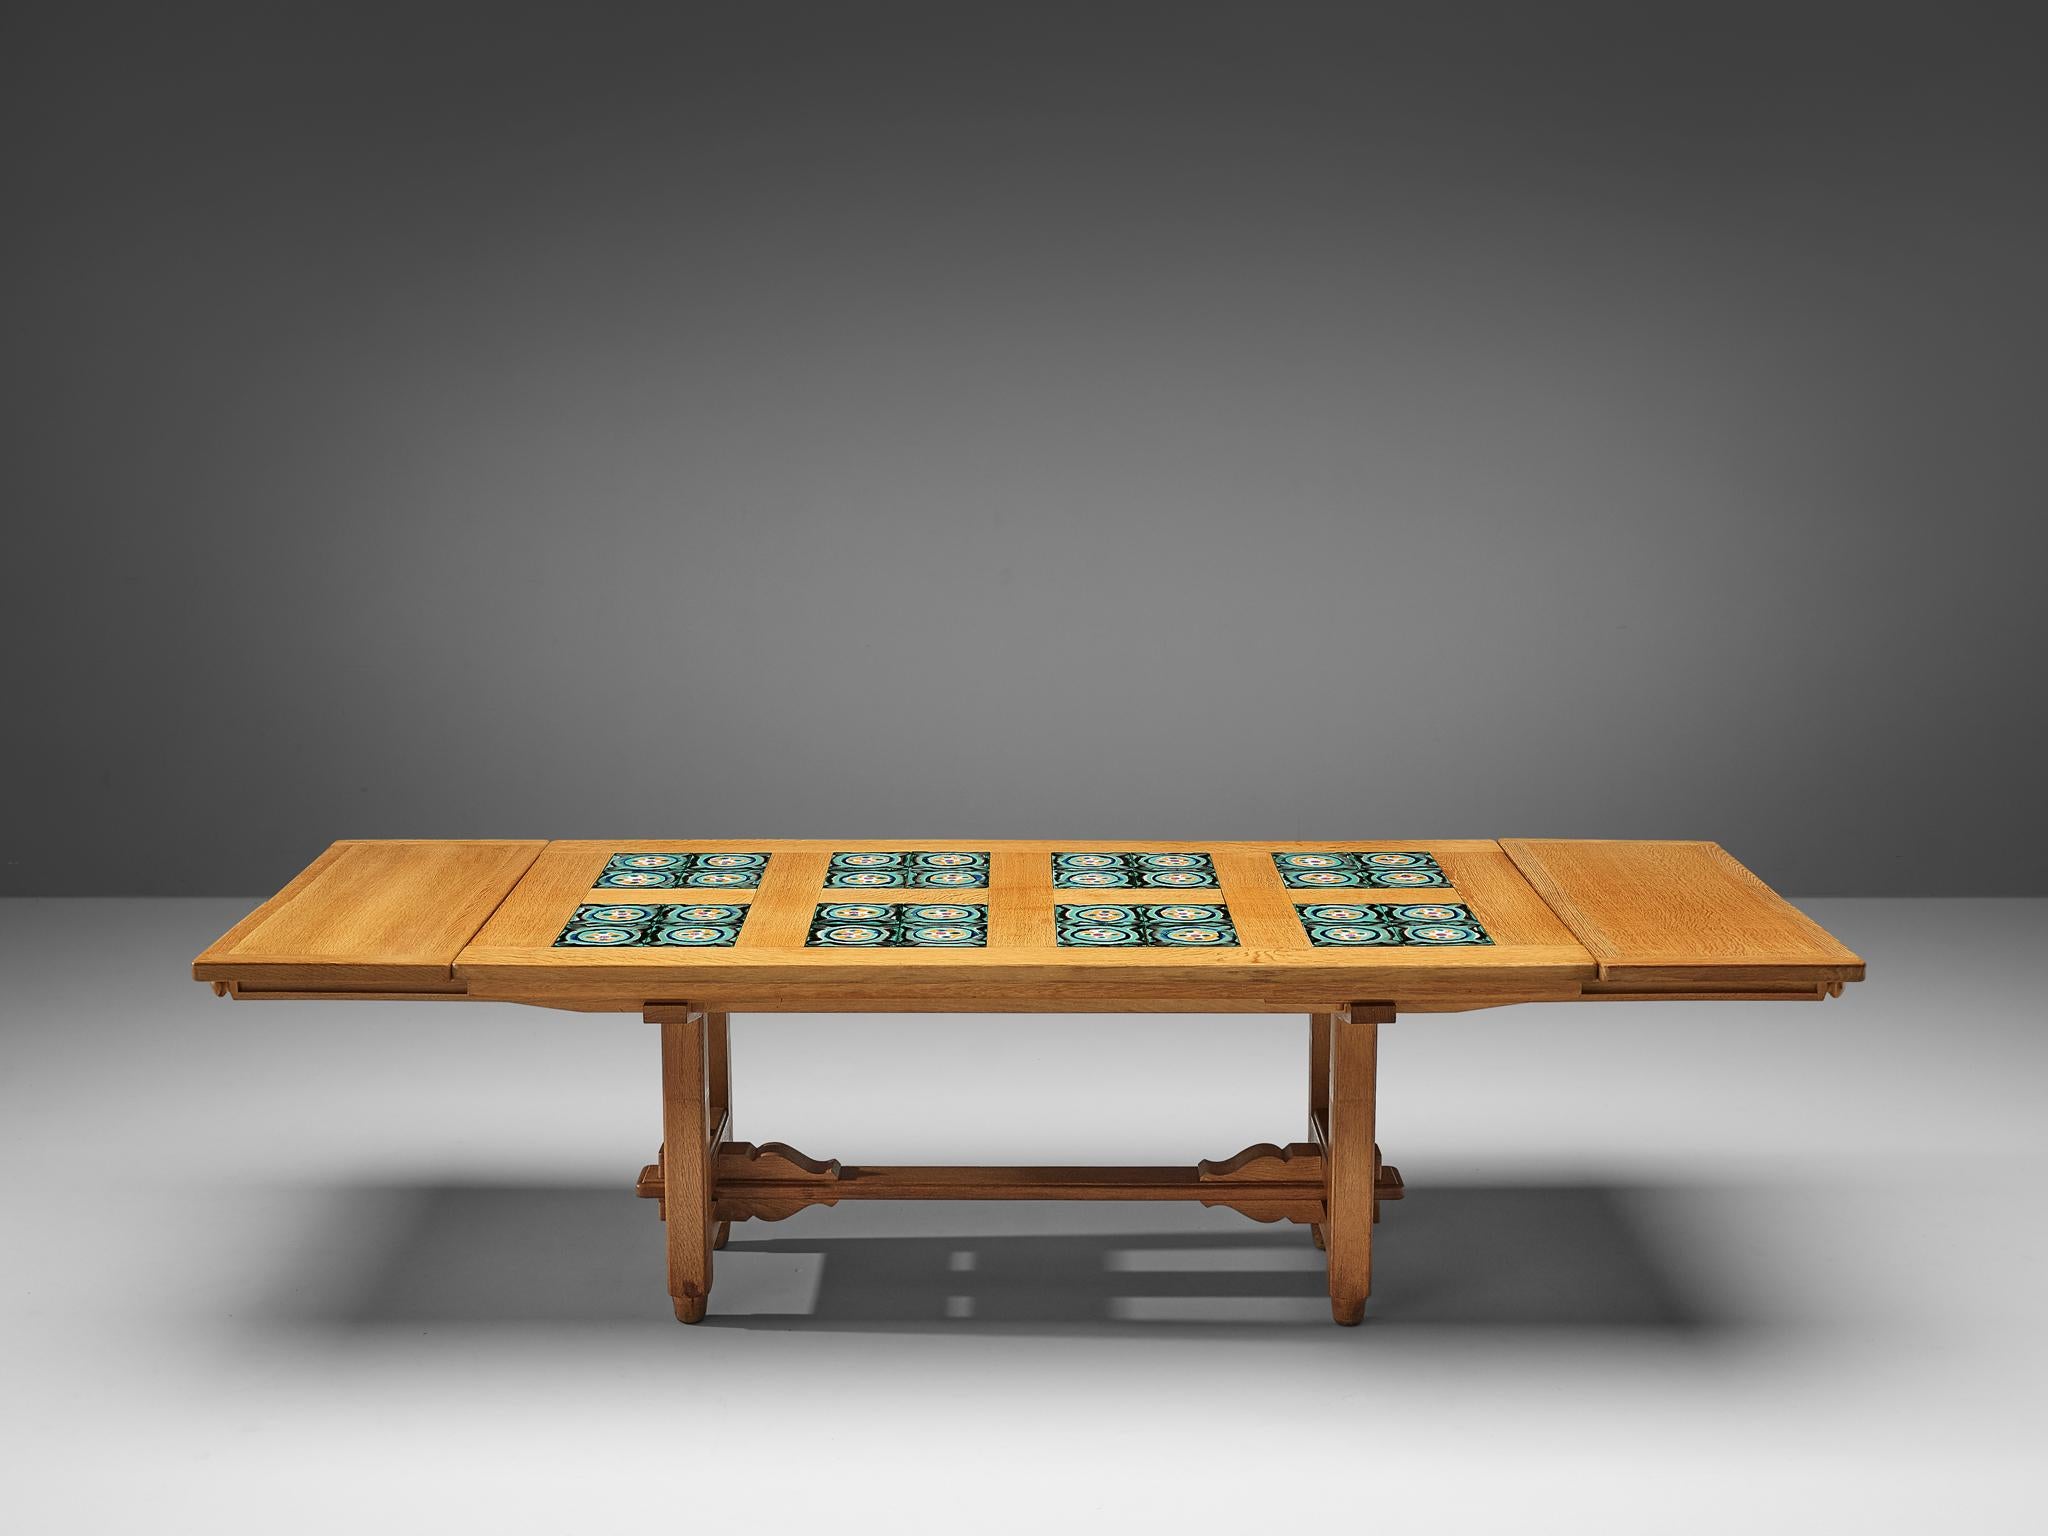 Guillerme et Chambron, extendable dining table, oak, ceramics, France, 1960s

This extandable dining table by Guillerme et Chambron features beautiful ceramic tiles. On the main rectangular tabletop four tiles are combined in eight squared inlays.